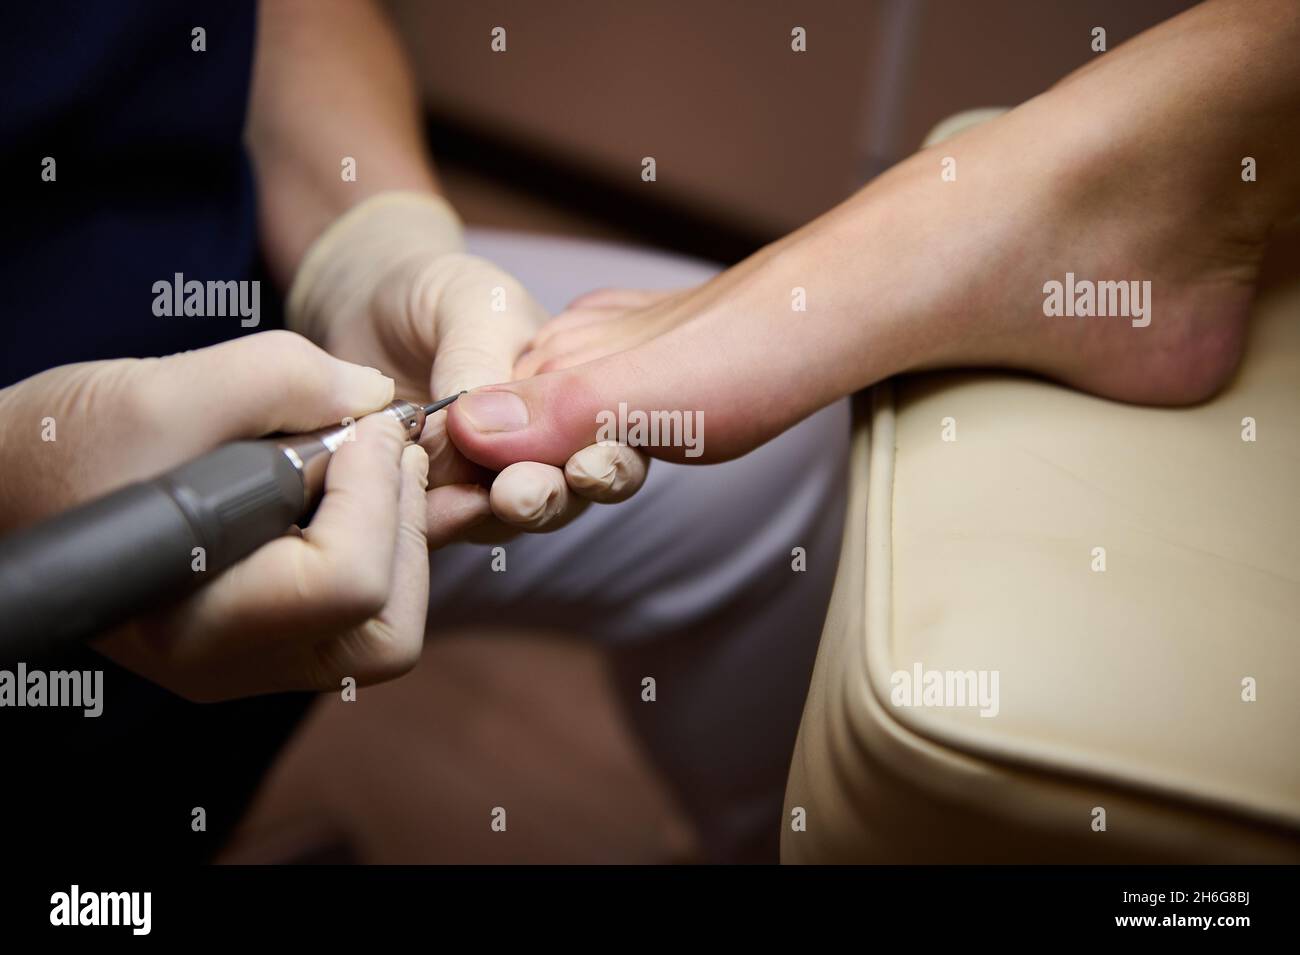 Professional pedicure using dieffenbach scalpel.Patient visiting  podiatrist.Medical pedicure procedure using special instrument with blade  knife holder.Foot treatment in SPA salon.Podiatry clinic Stock Photo by  ©juriymaslak.gmail.com 391840394